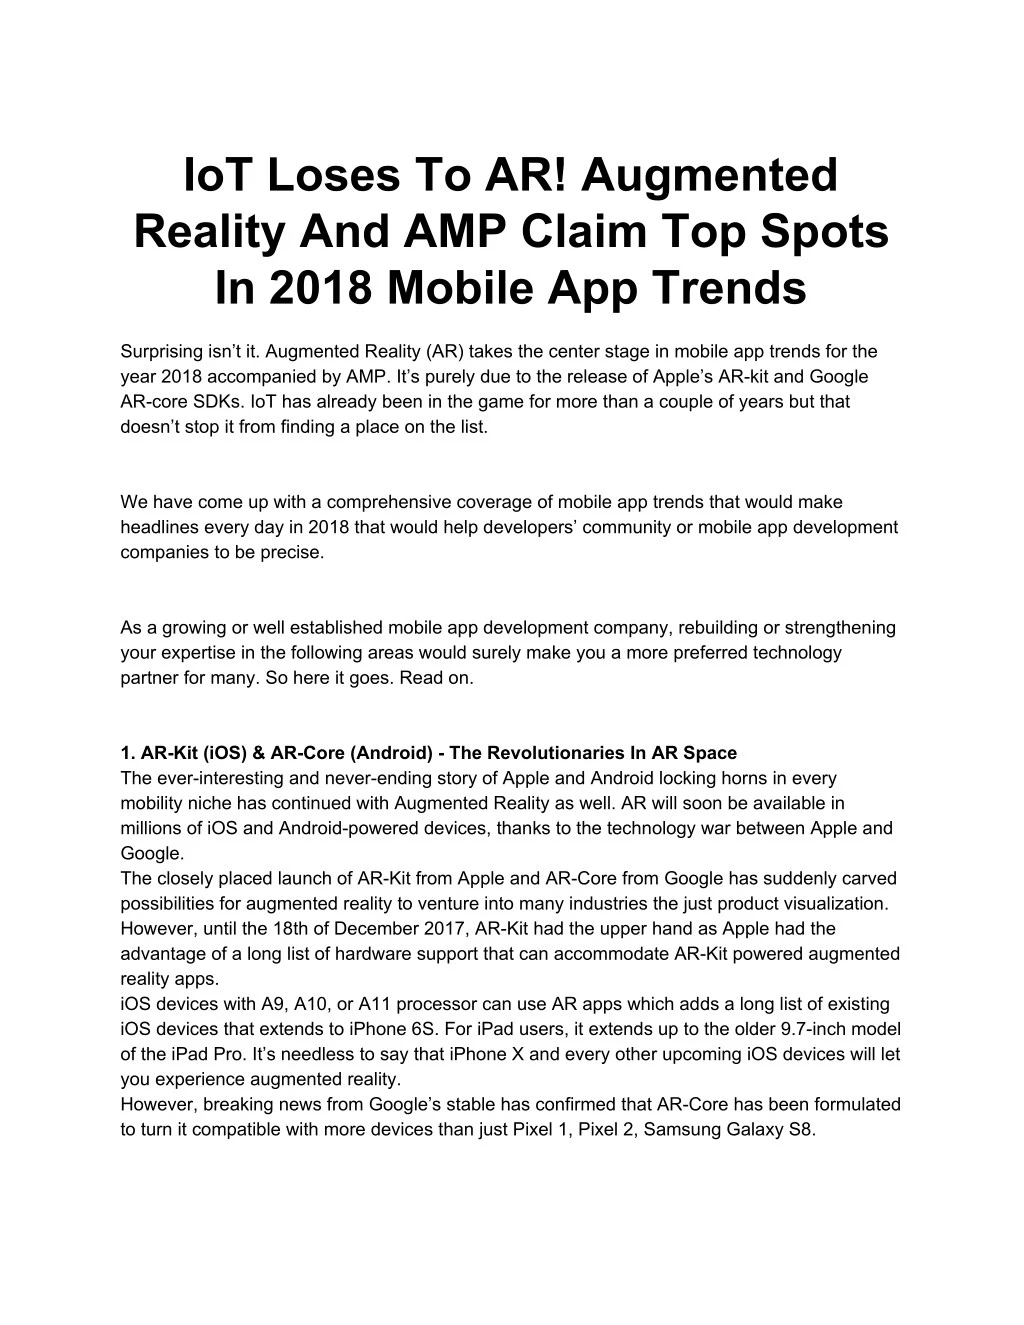 iot loses to ar augmented reality and amp claim